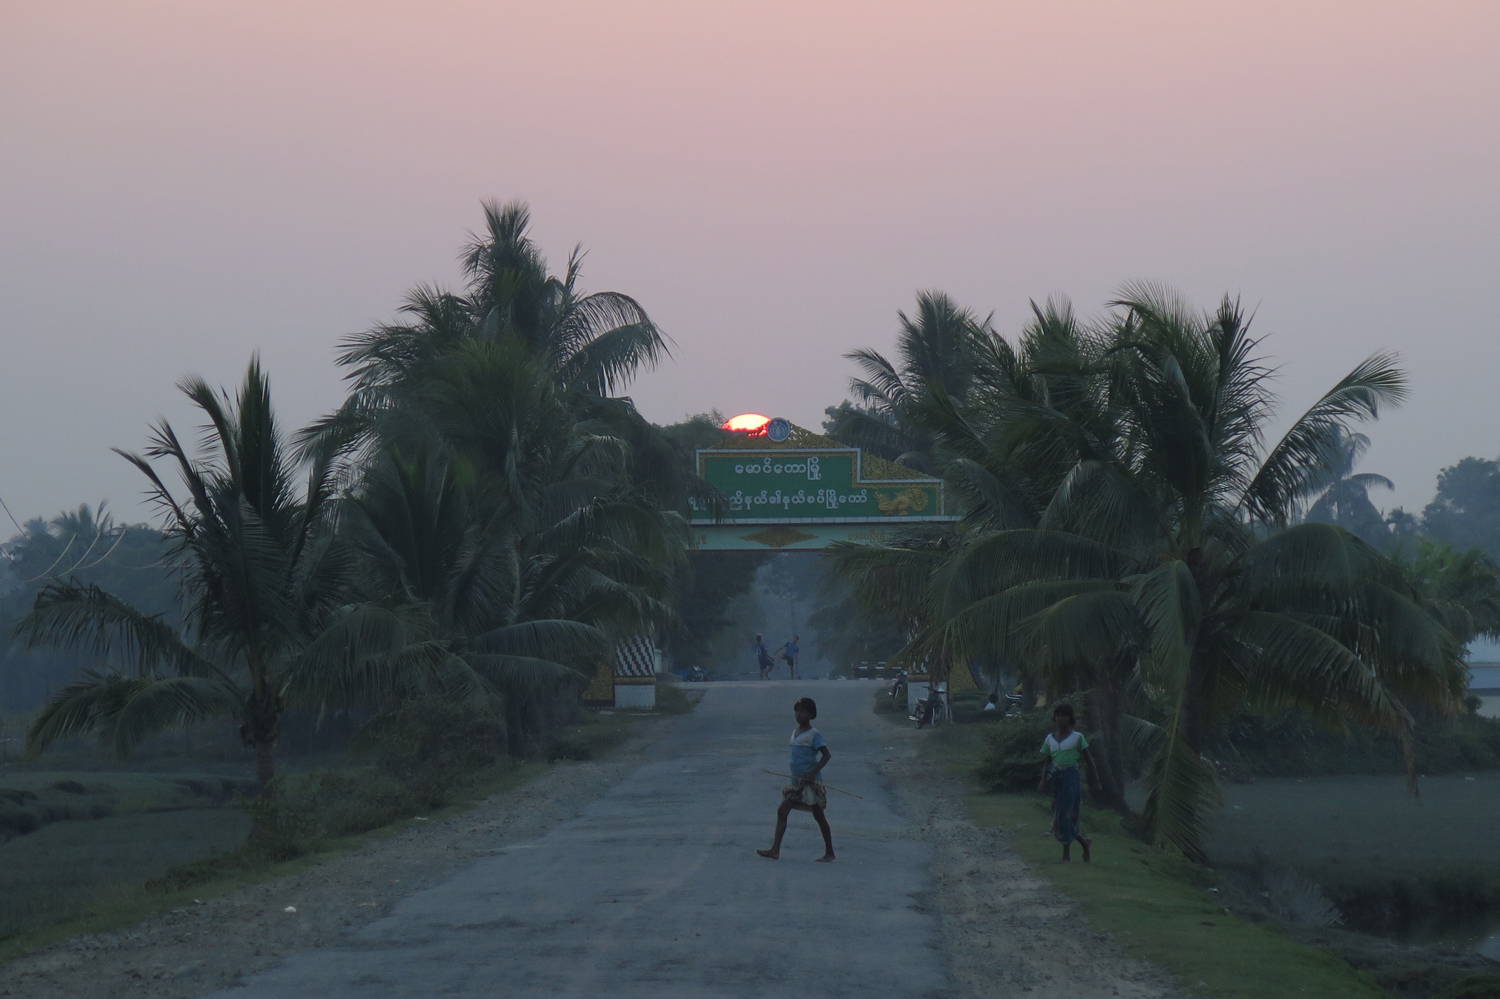 The entrance to Maungdaw town. (Photo: Moe Myint / The Irrawaddy)